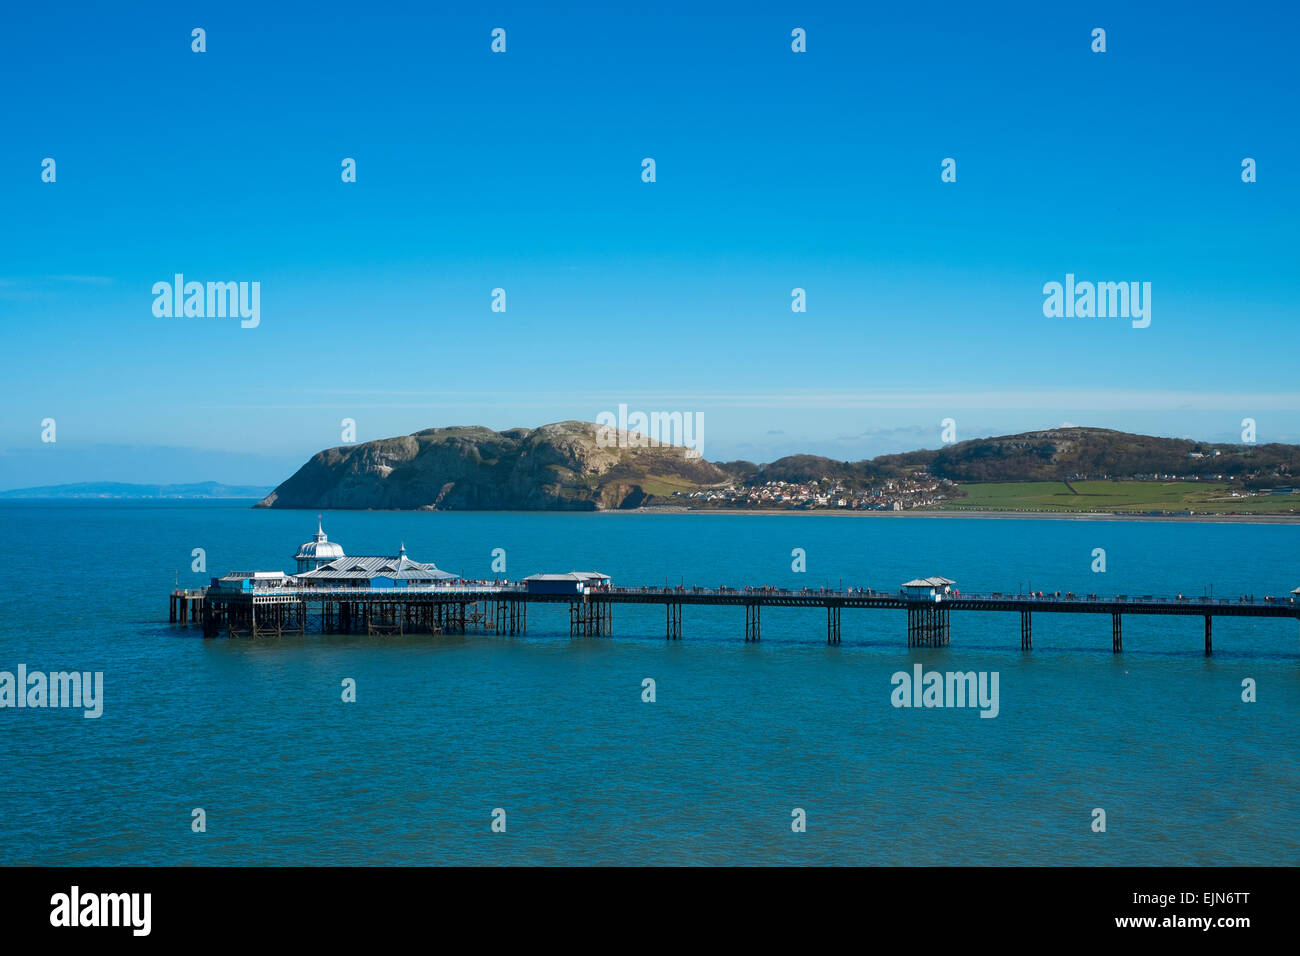 Llandudno pier and Little Orme seen from Great Orme, Conwy, Wales, UK Stock Photo